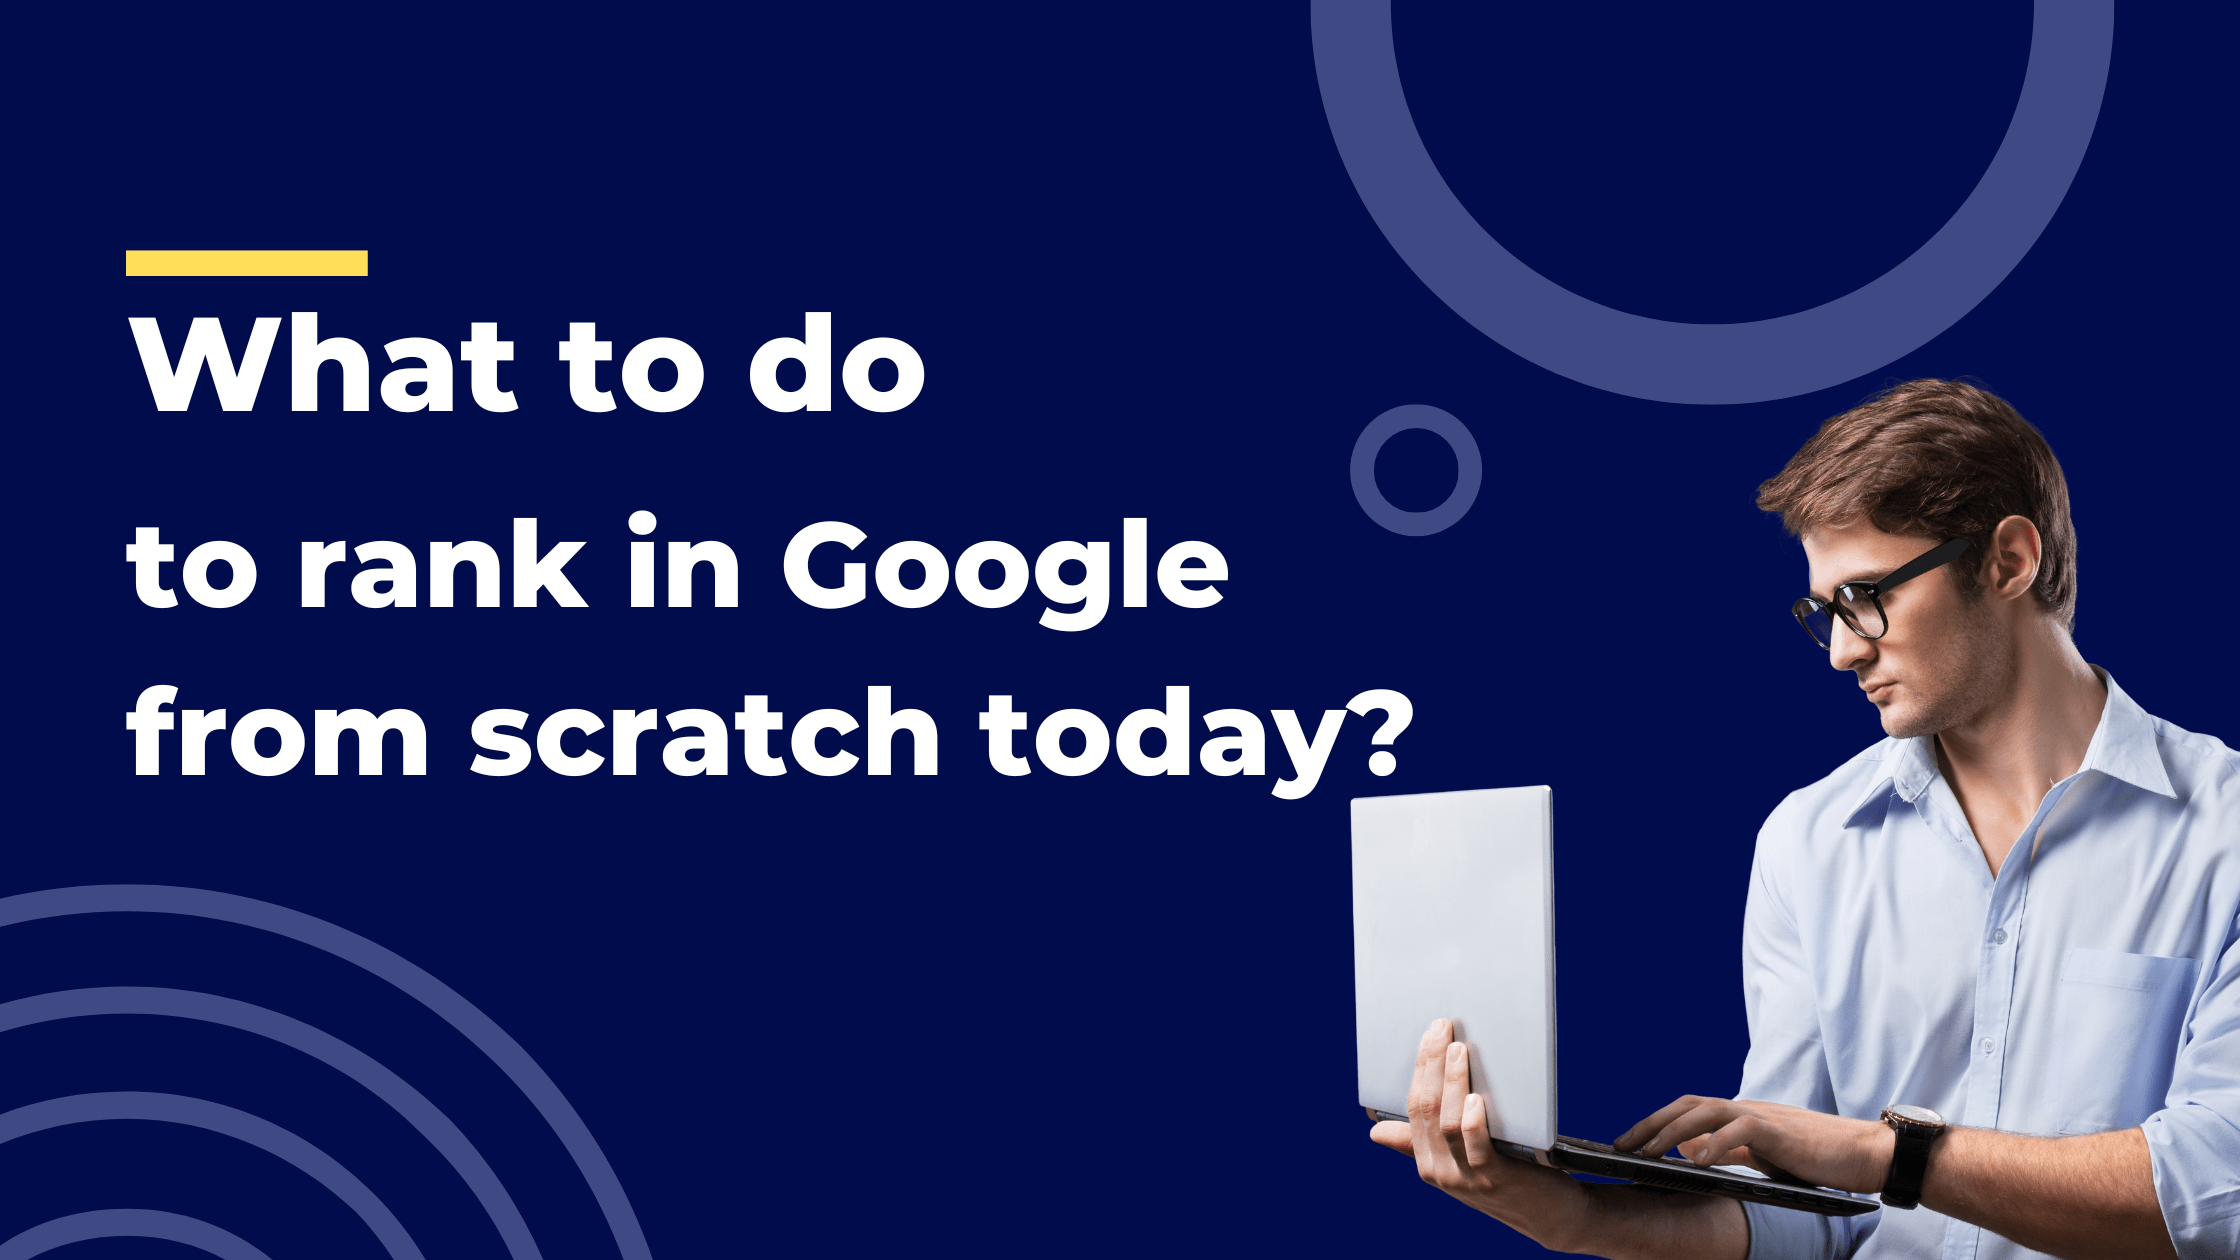 What to do to rank in Google from scratch today